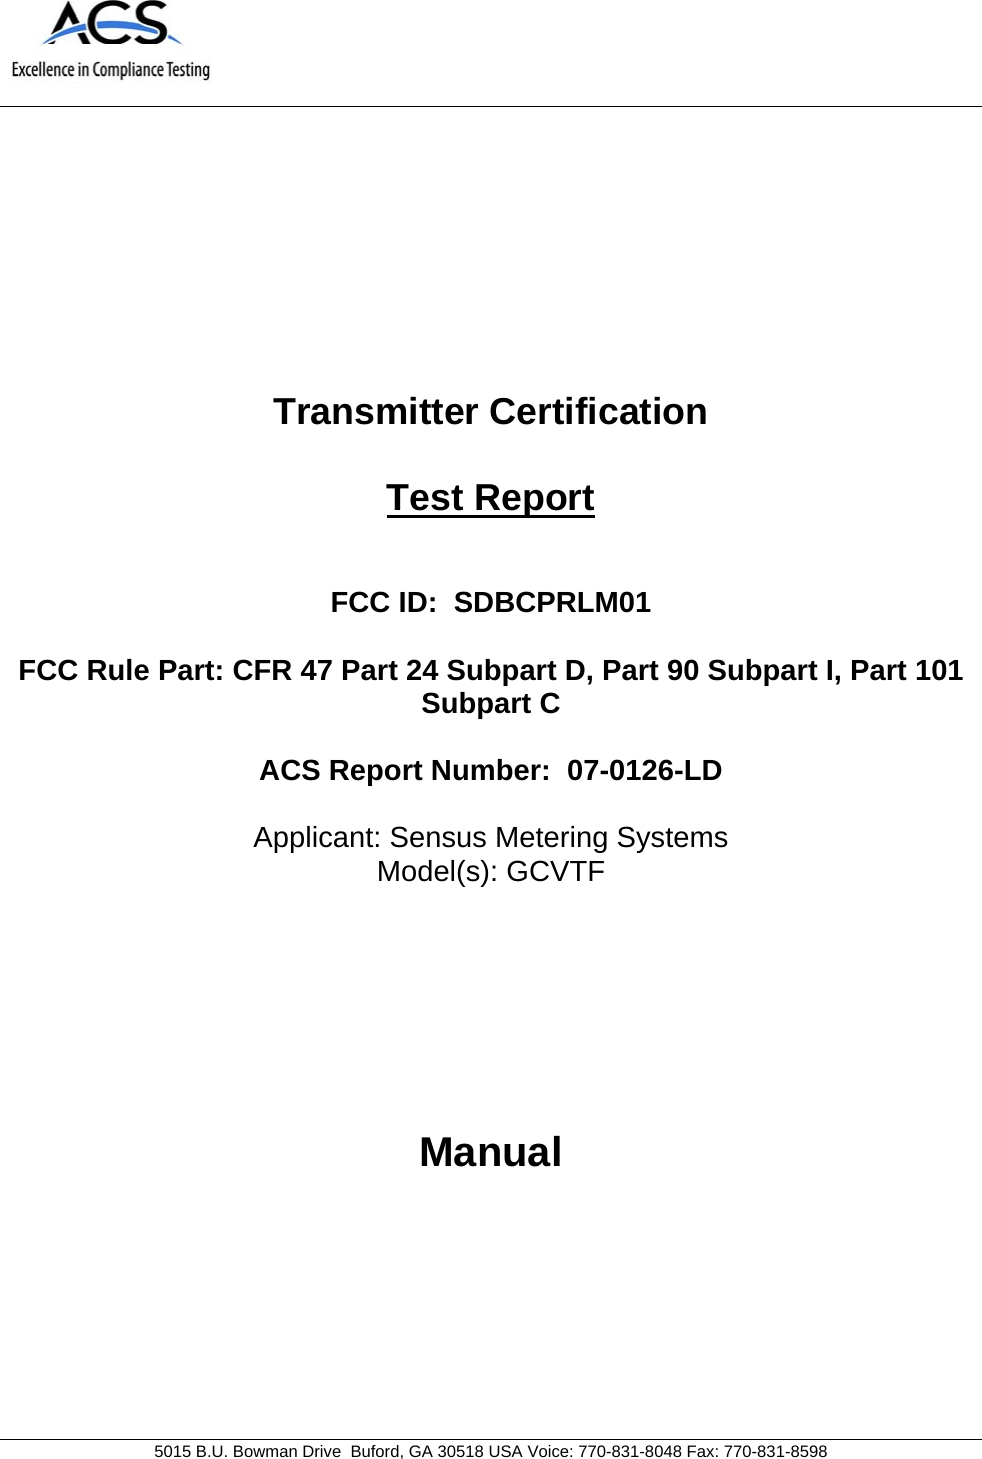                               5015 B.U. Bowman Drive  Buford, GA 30518 USA Voice: 770-831-8048 Fax: 770-831-8598   Transmitter Certification  Test Report   FCC ID:  SDBCPRLM01  FCC Rule Part: CFR 47 Part 24 Subpart D, Part 90 Subpart I, Part 101 Subpart C  ACS Report Number:  07-0126-LD   Applicant: Sensus Metering Systems Model(s): GCVTF      Manual 